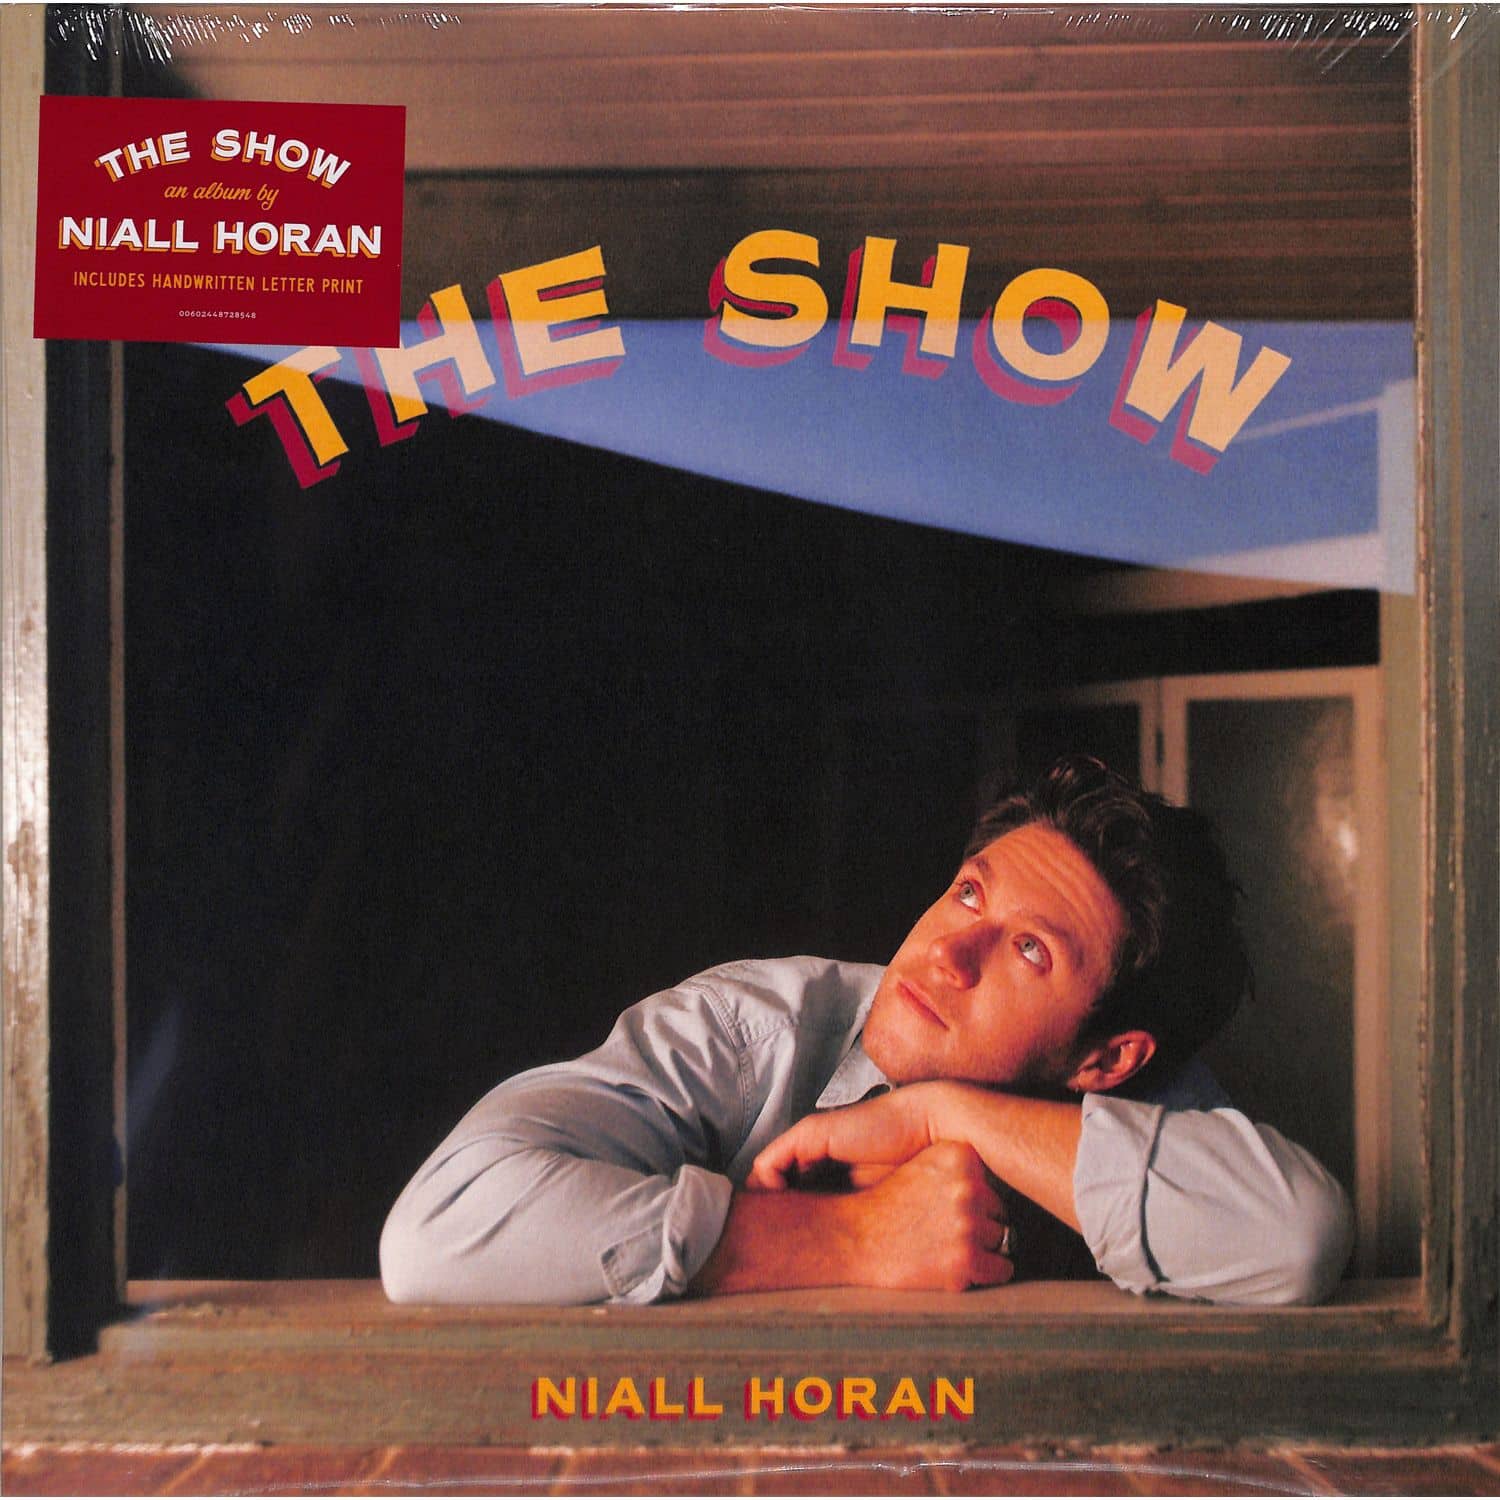 Niall Horan - THE SHOW 